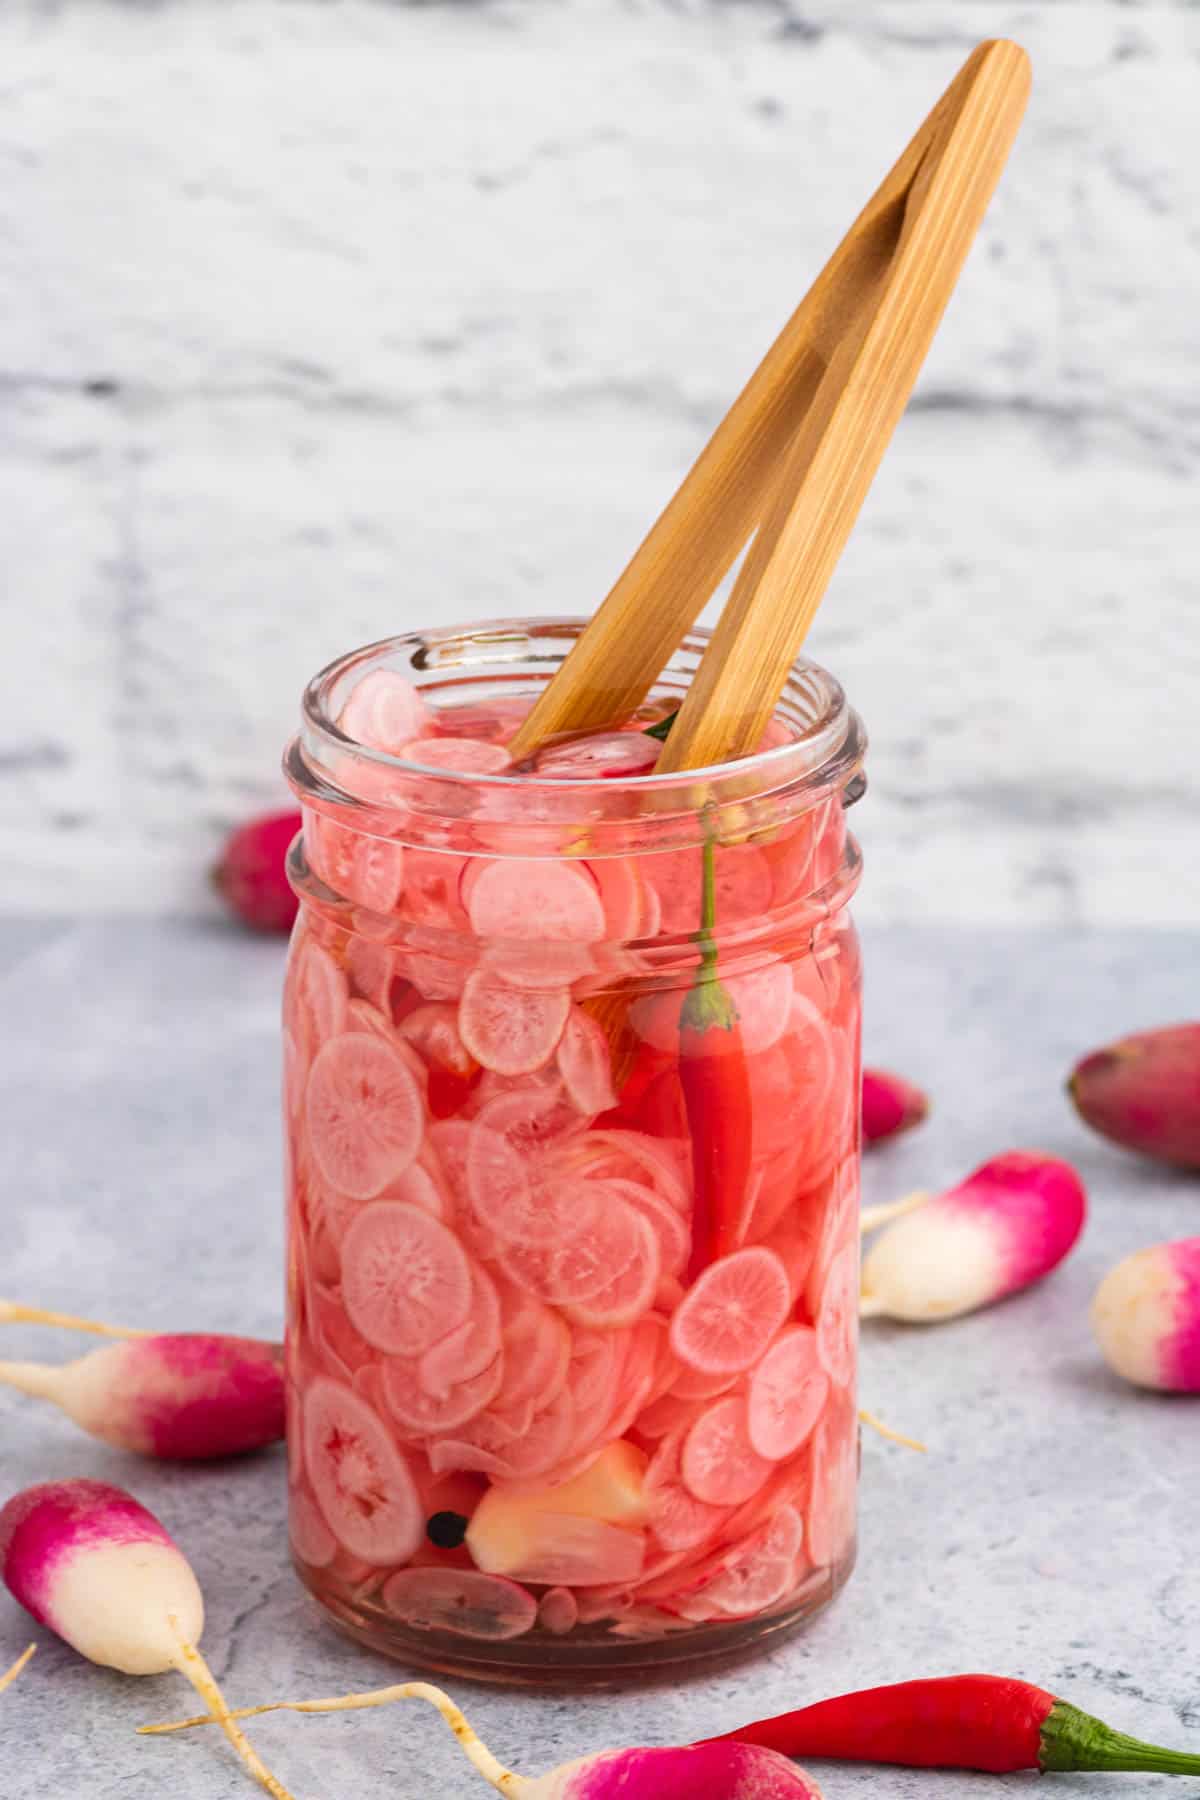 A half-pint glass jar filled with quick pickled radishes and a pair of wooden tongs.